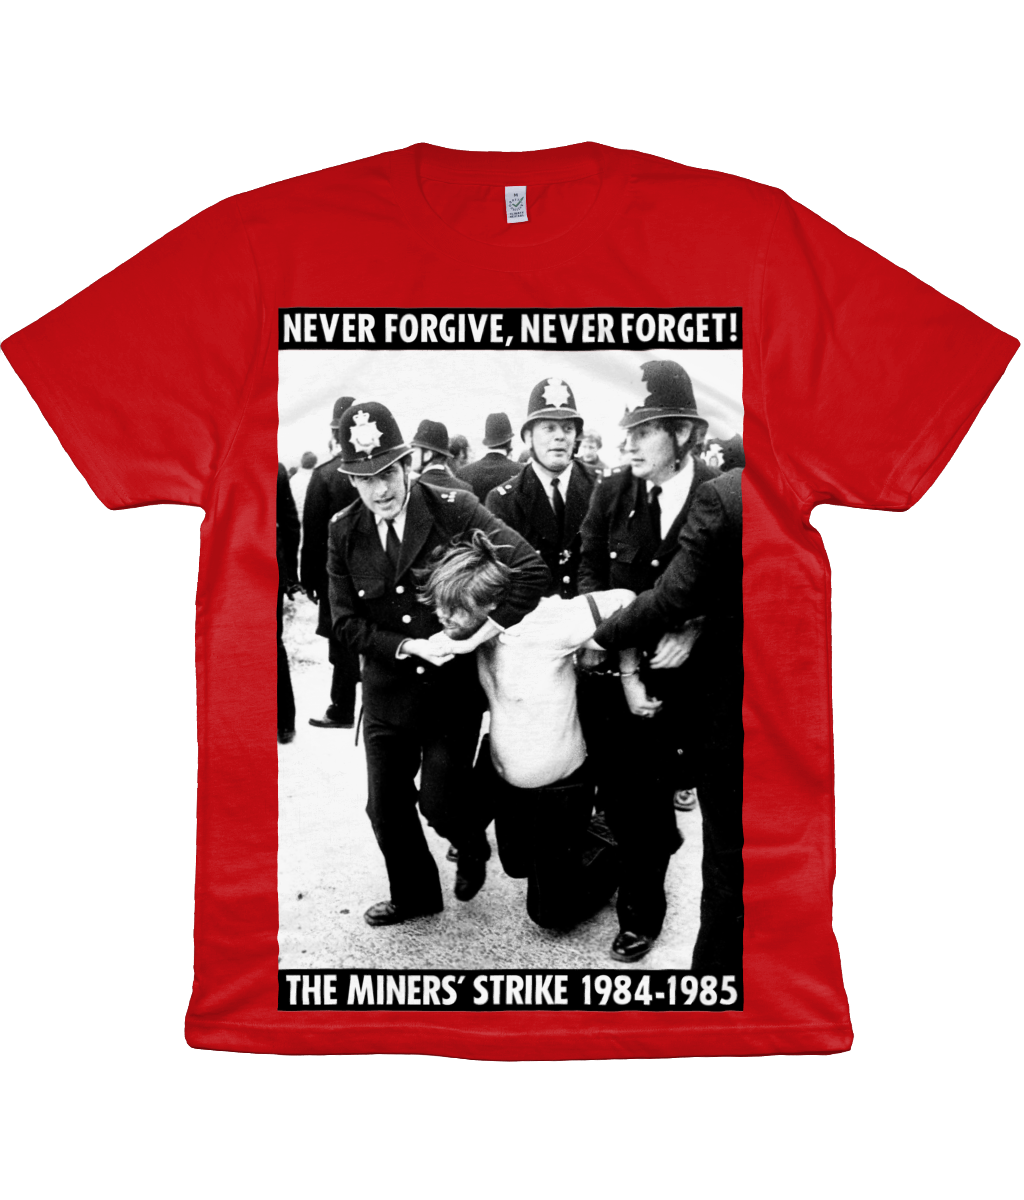 NEVER FORGIVE, NEVER FORGET! - THE MINERS' STRIKE 1984-1985 - #1